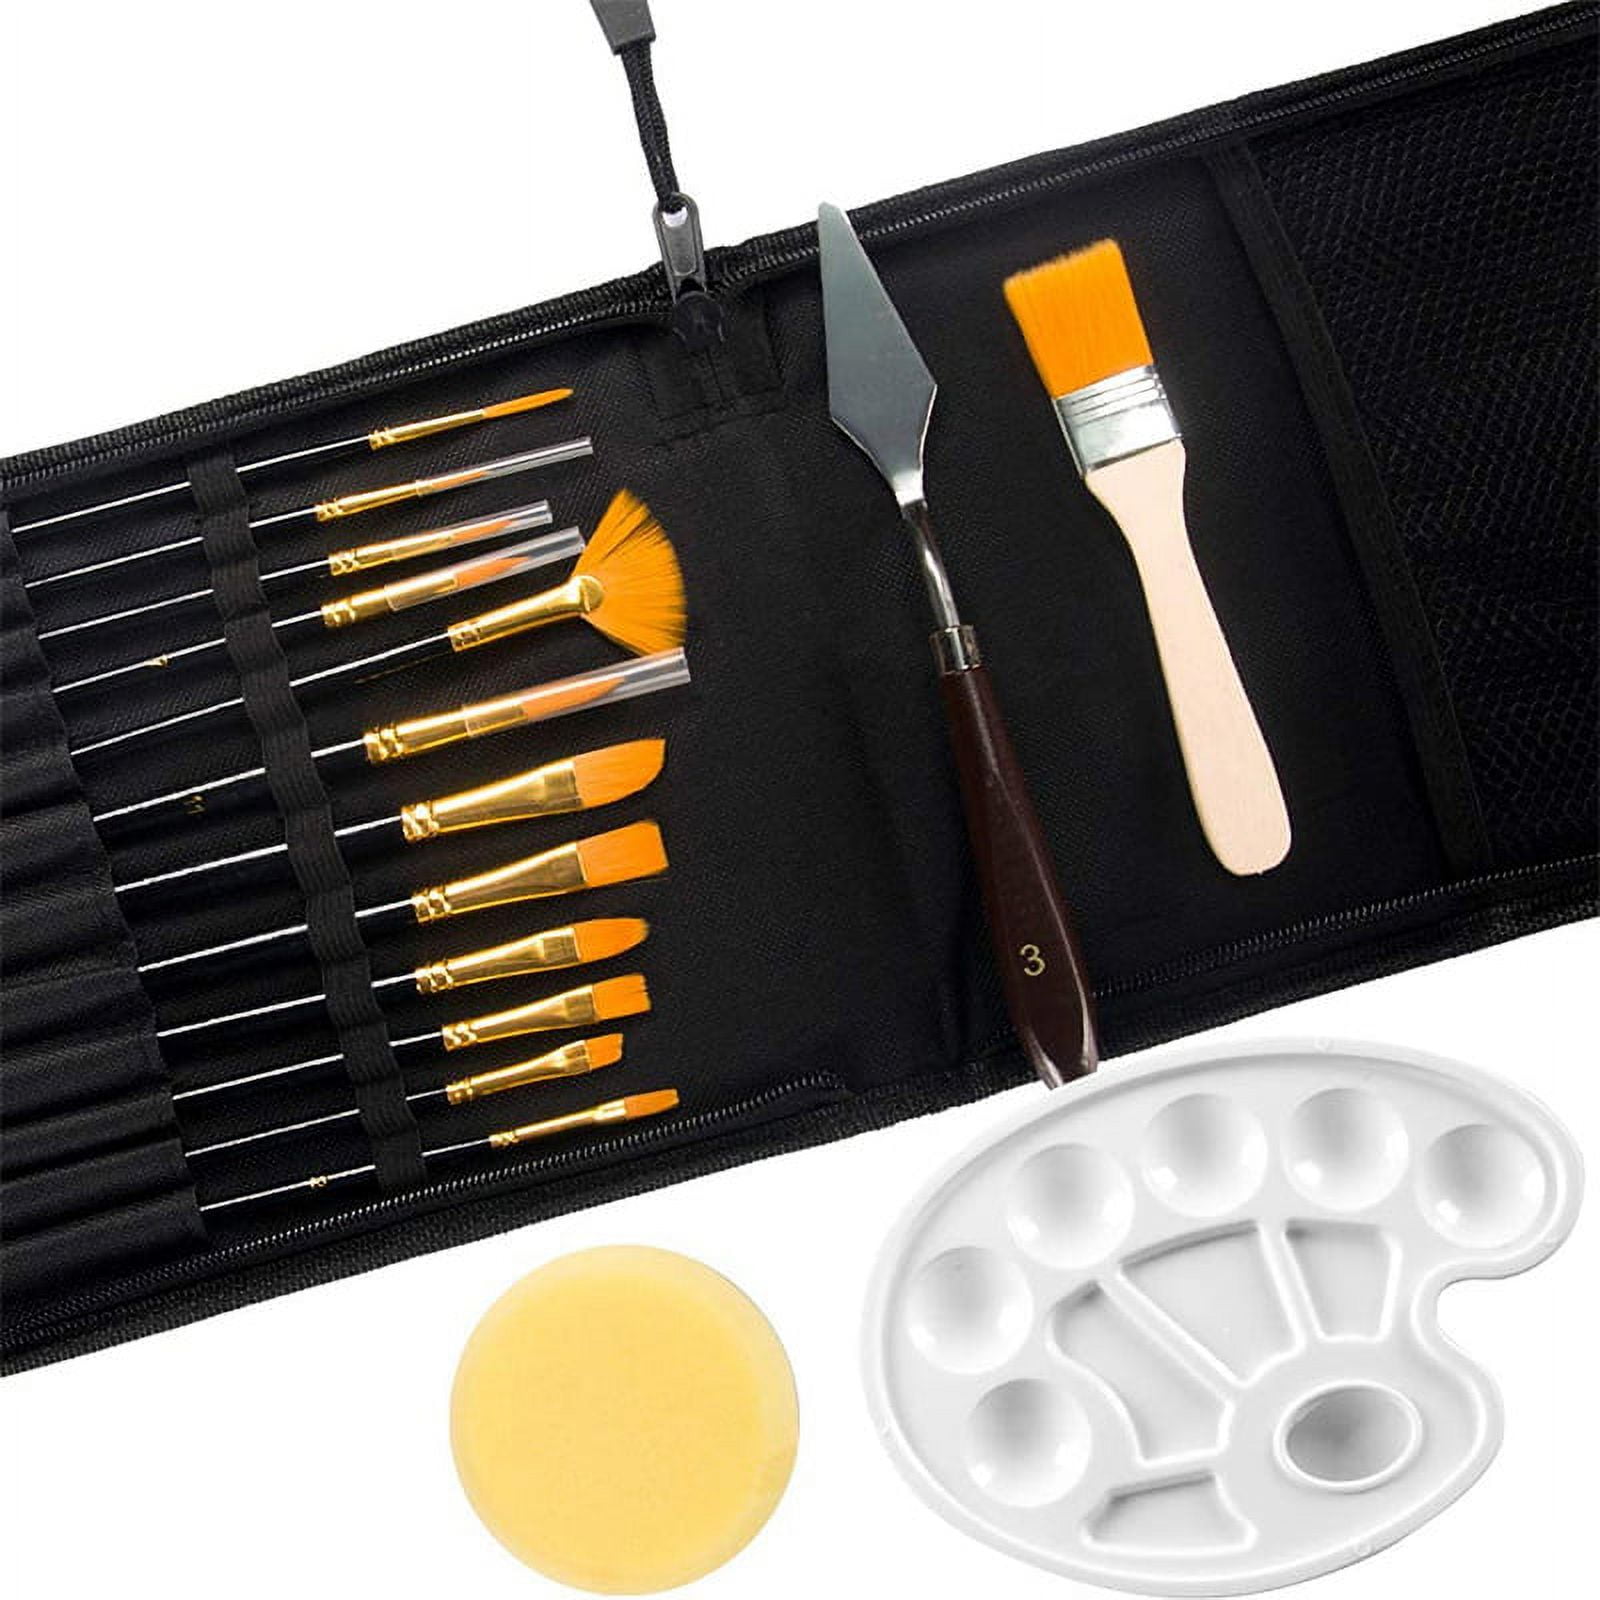 16 Pcs Paint Brushes Set 12 Sizes Painting Brush with Palette Knife, Sponge and Oil Tray for Acrylic, Watercolor, Yellow